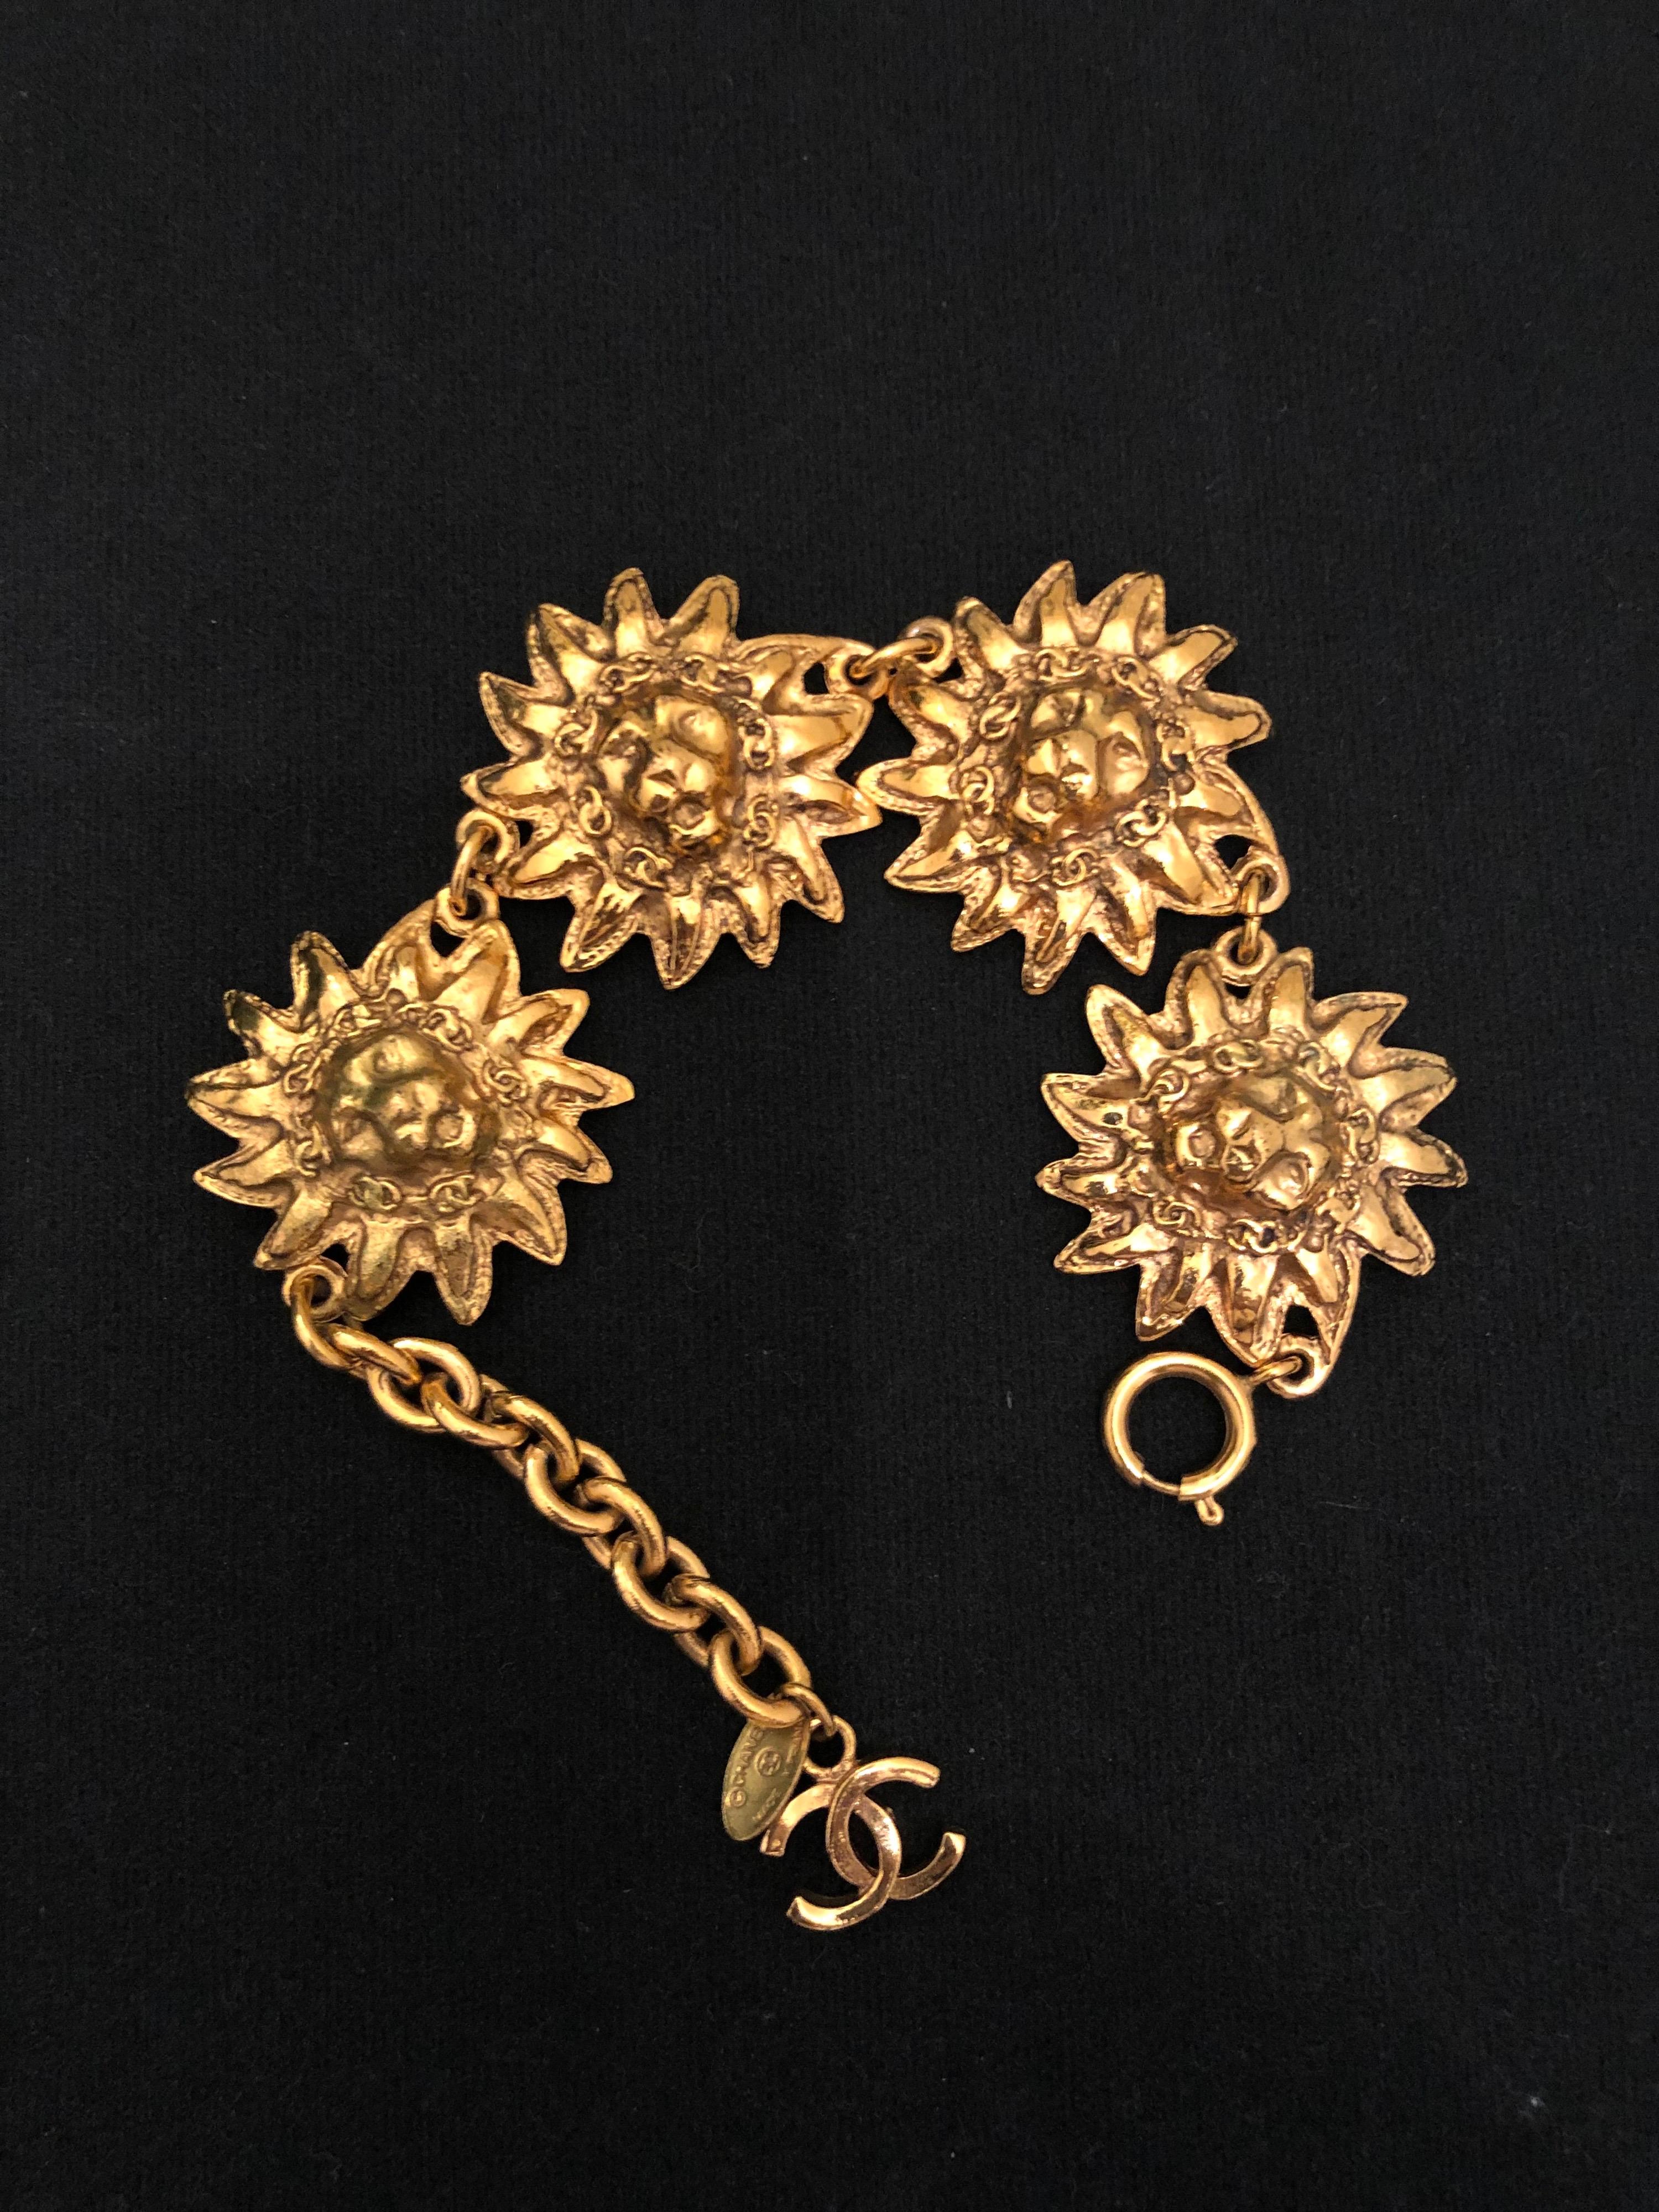 1980s Chanel gold toned lion chain bracelet featuring four lion heads adorned with seven CC logos around each lion head. 

Proud and regal, the lion has been used a reflection of Gabrielle Chanel's own power and independence. It also evokes her love